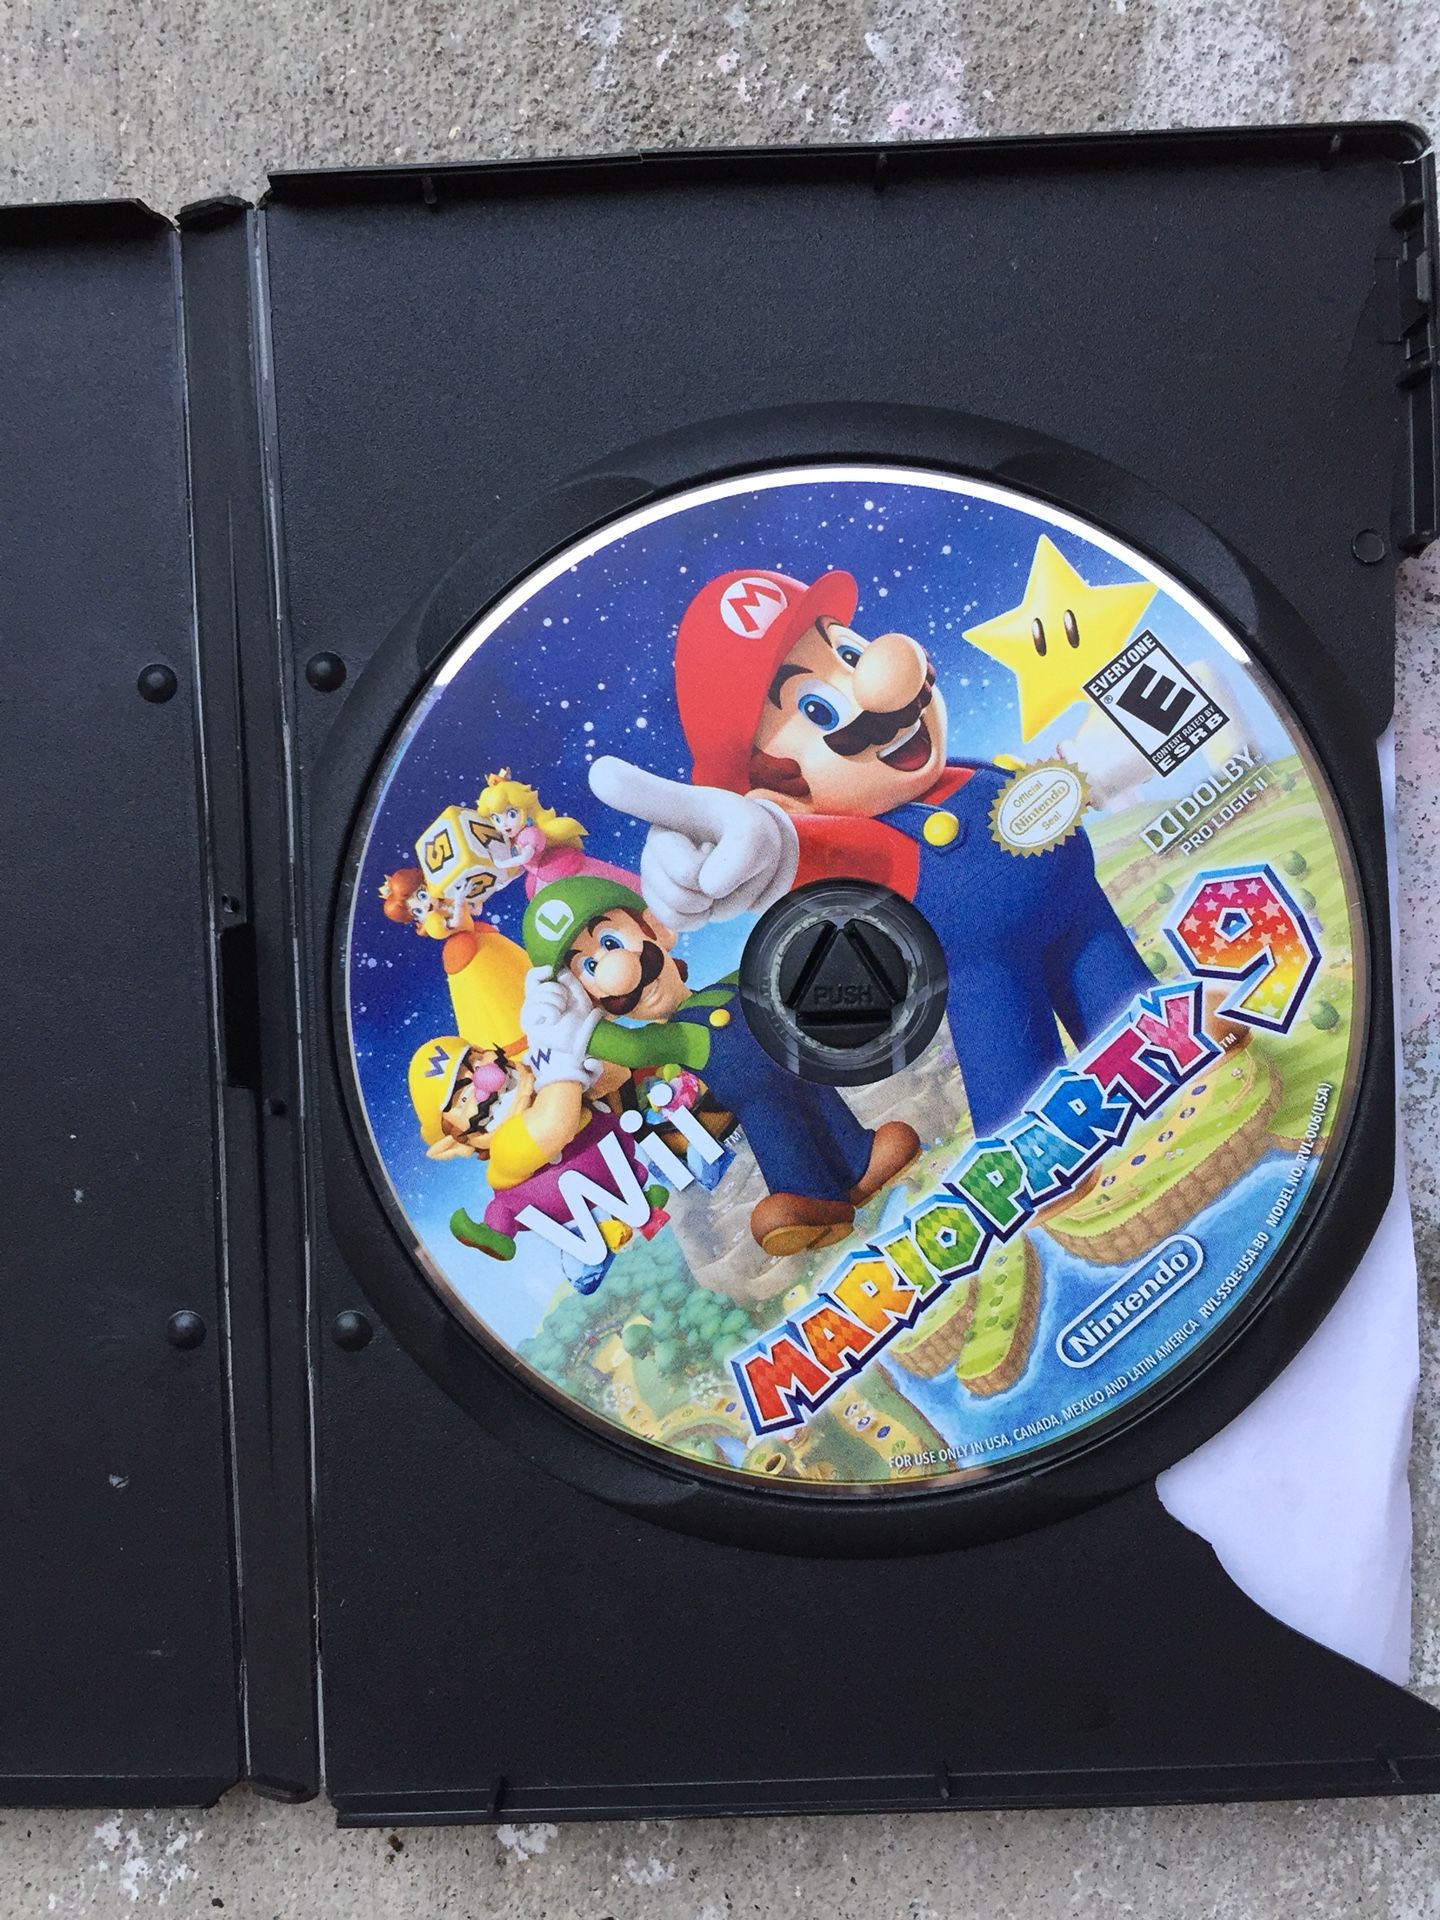 Mario party 9 disk only